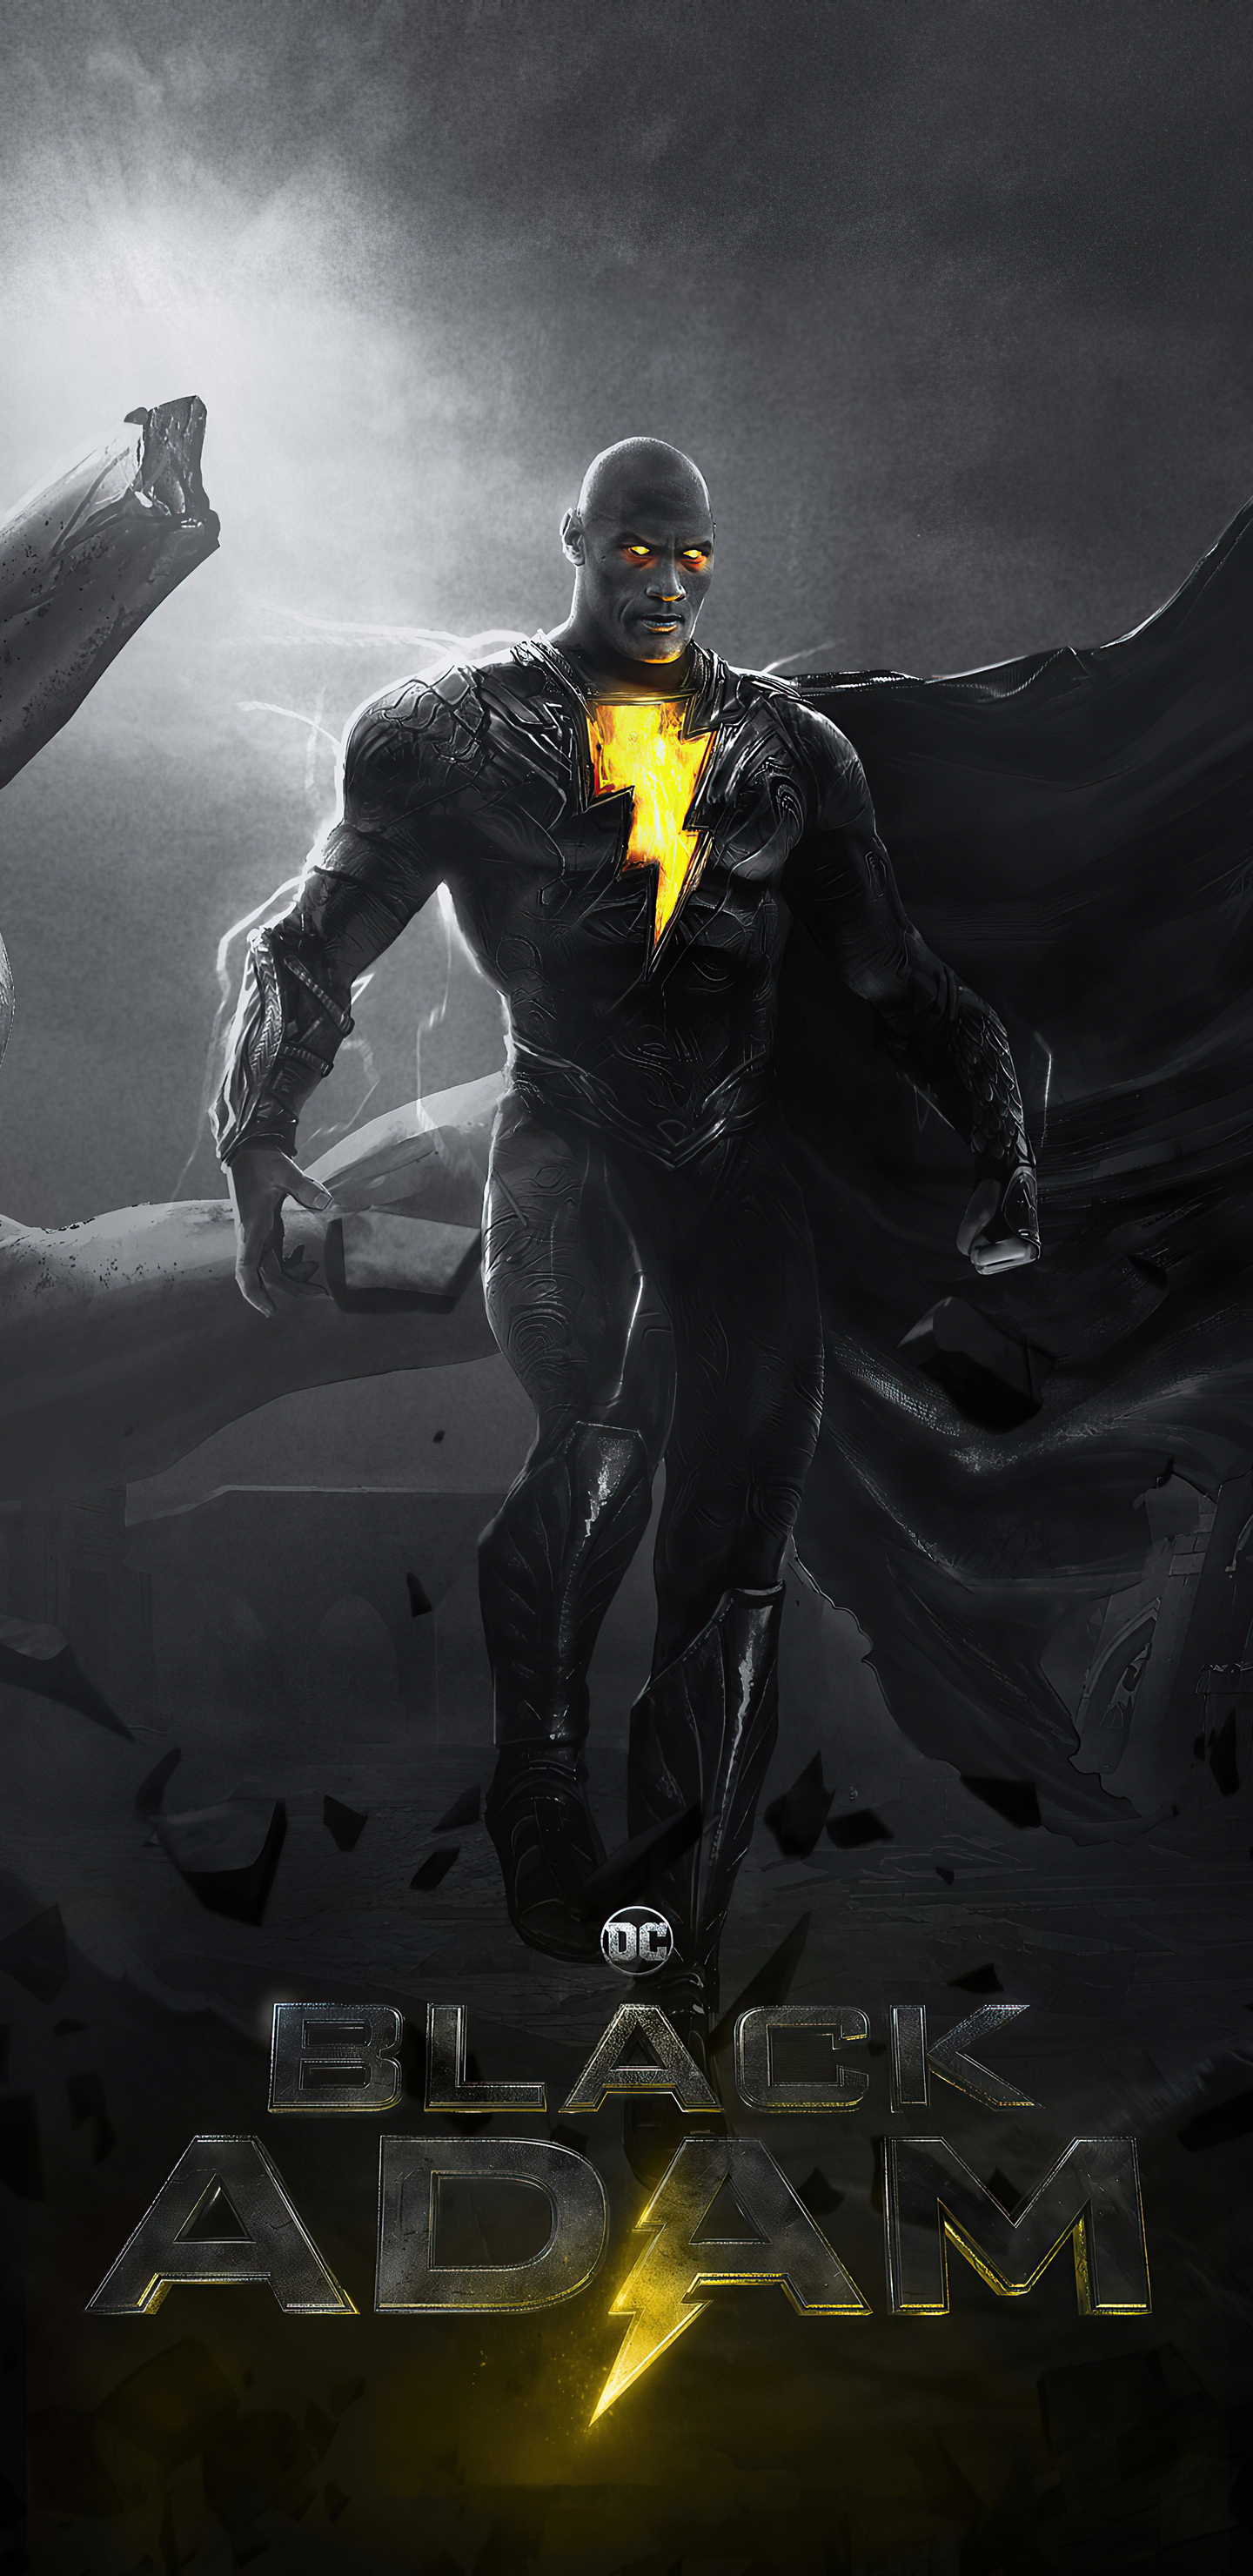 X rock black adam k samsung galaxy note sss qhd hd k wallpapers images backgrounds photos and pictures